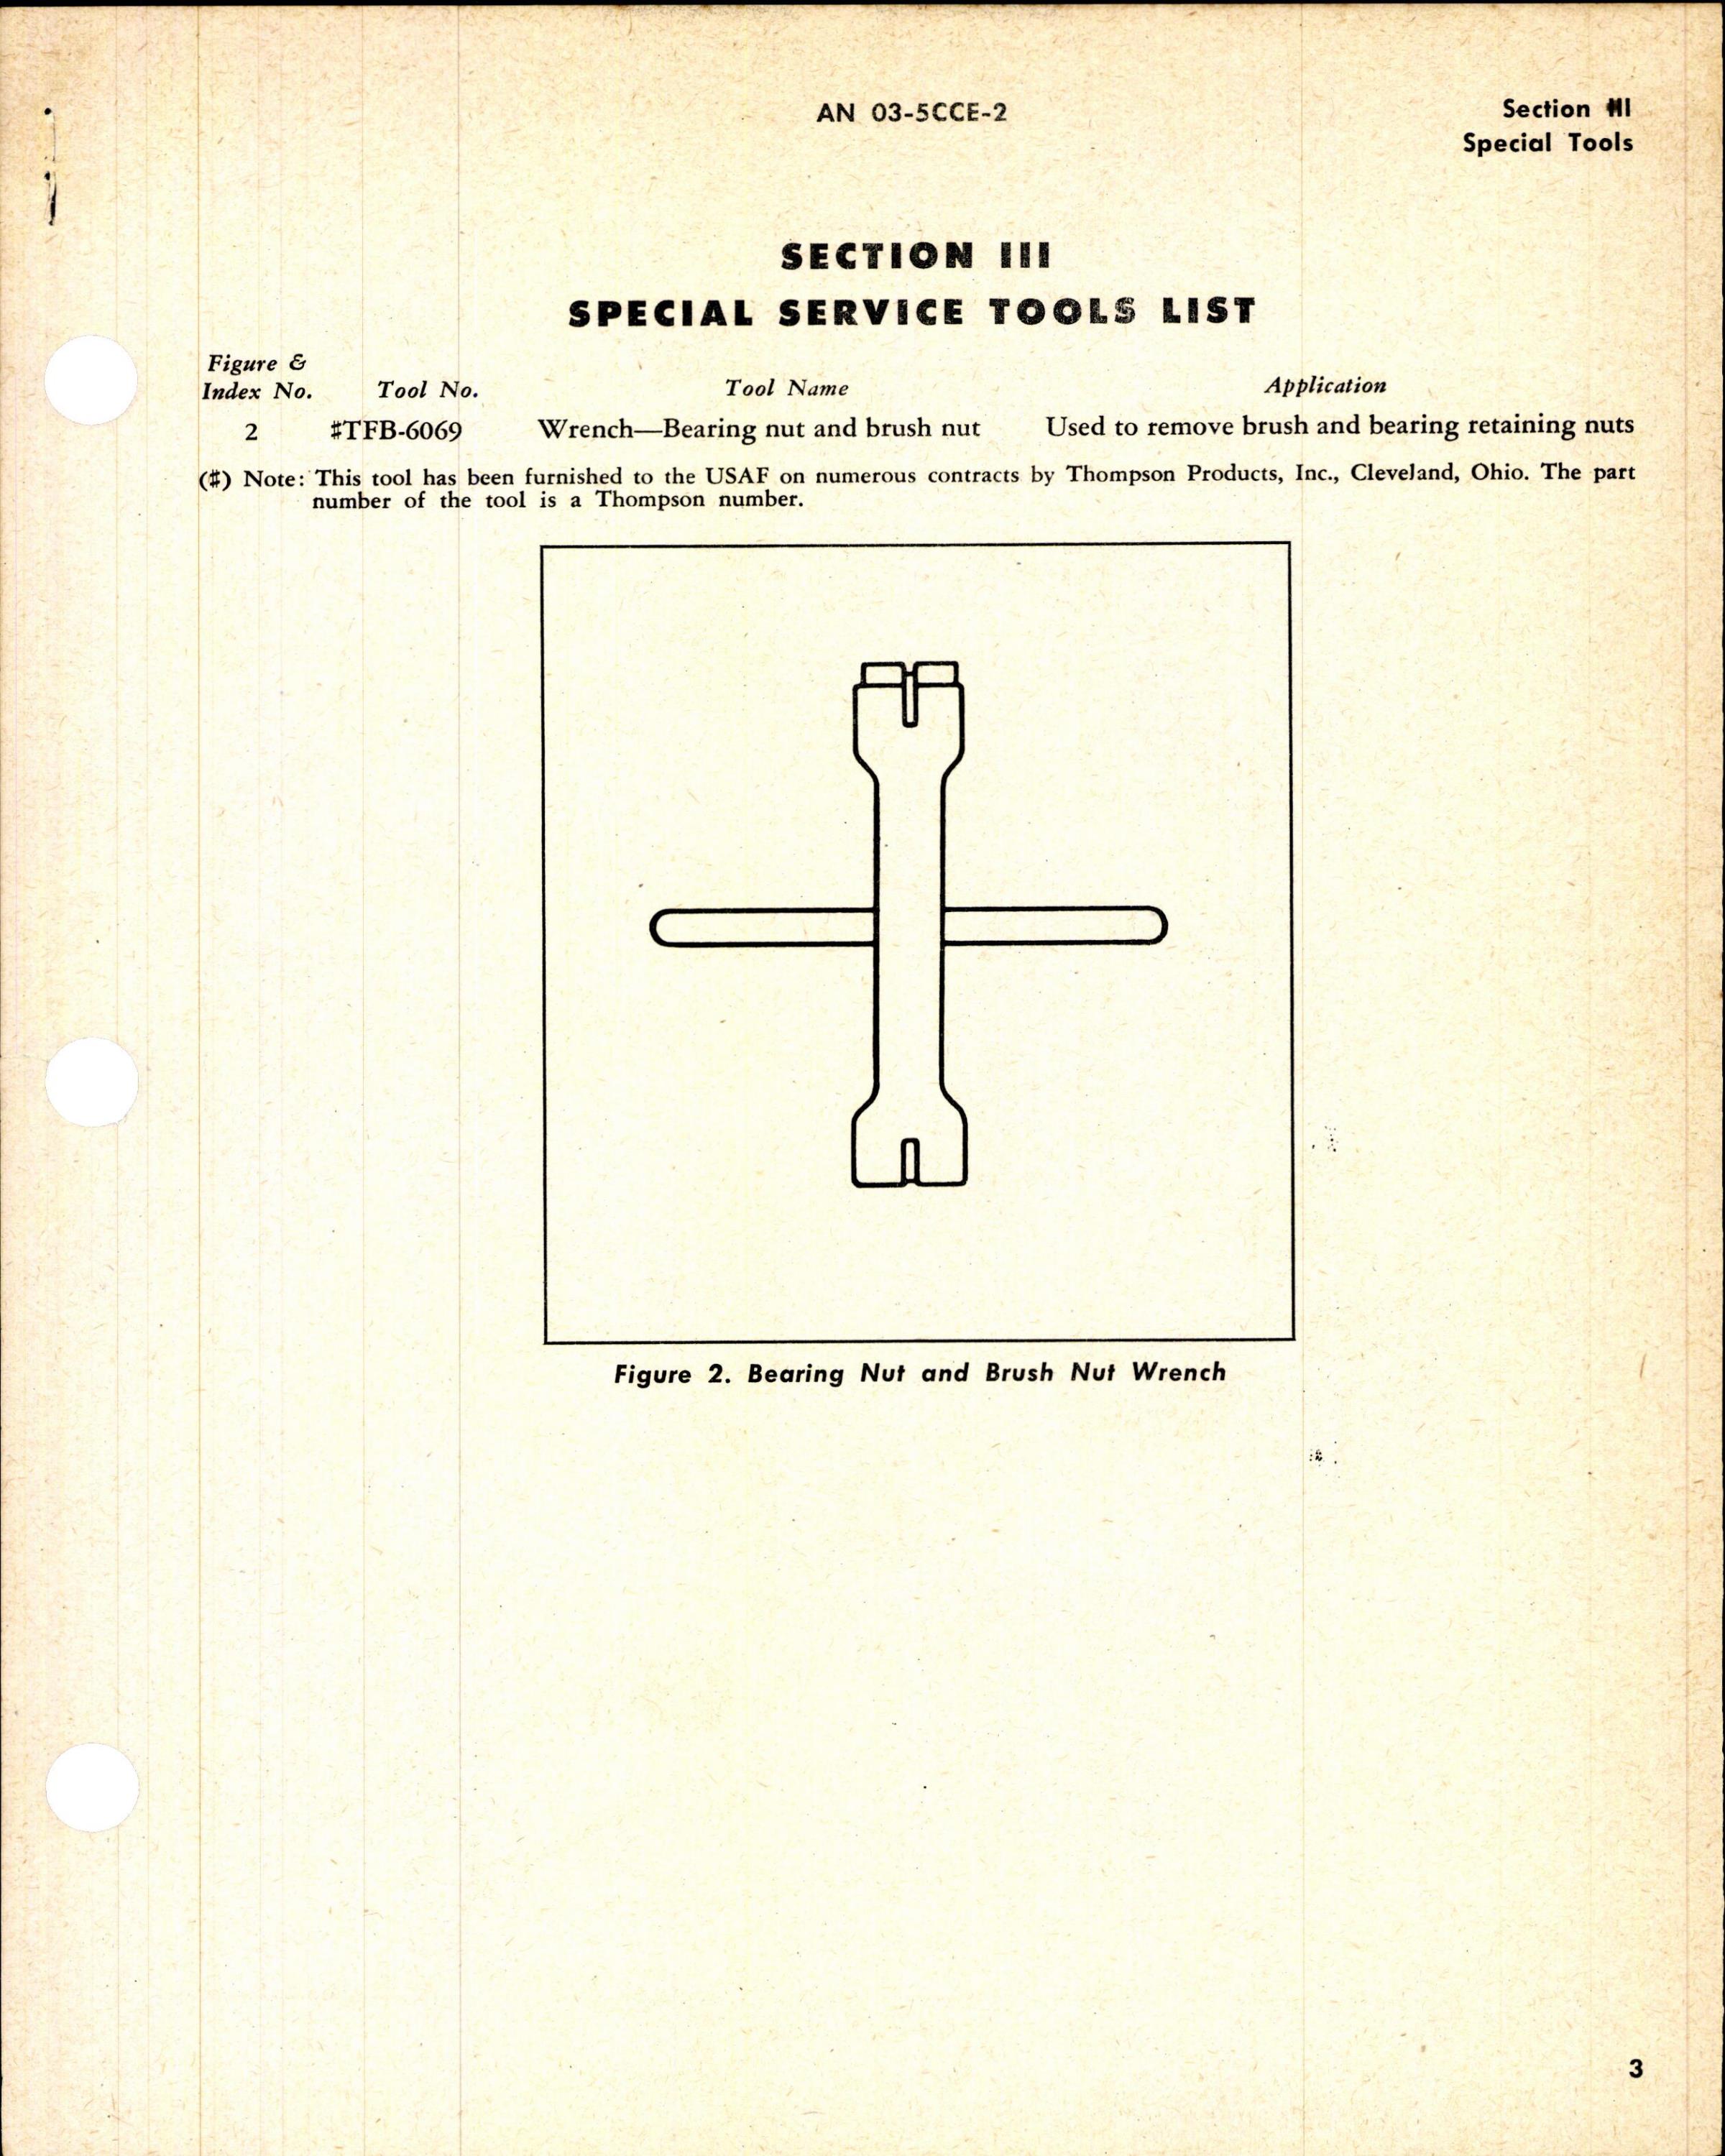 Sample page 5 from AirCorps Library document: Parts Catalog for Delco Electric Defroster Fan Motor Part No. A-7511